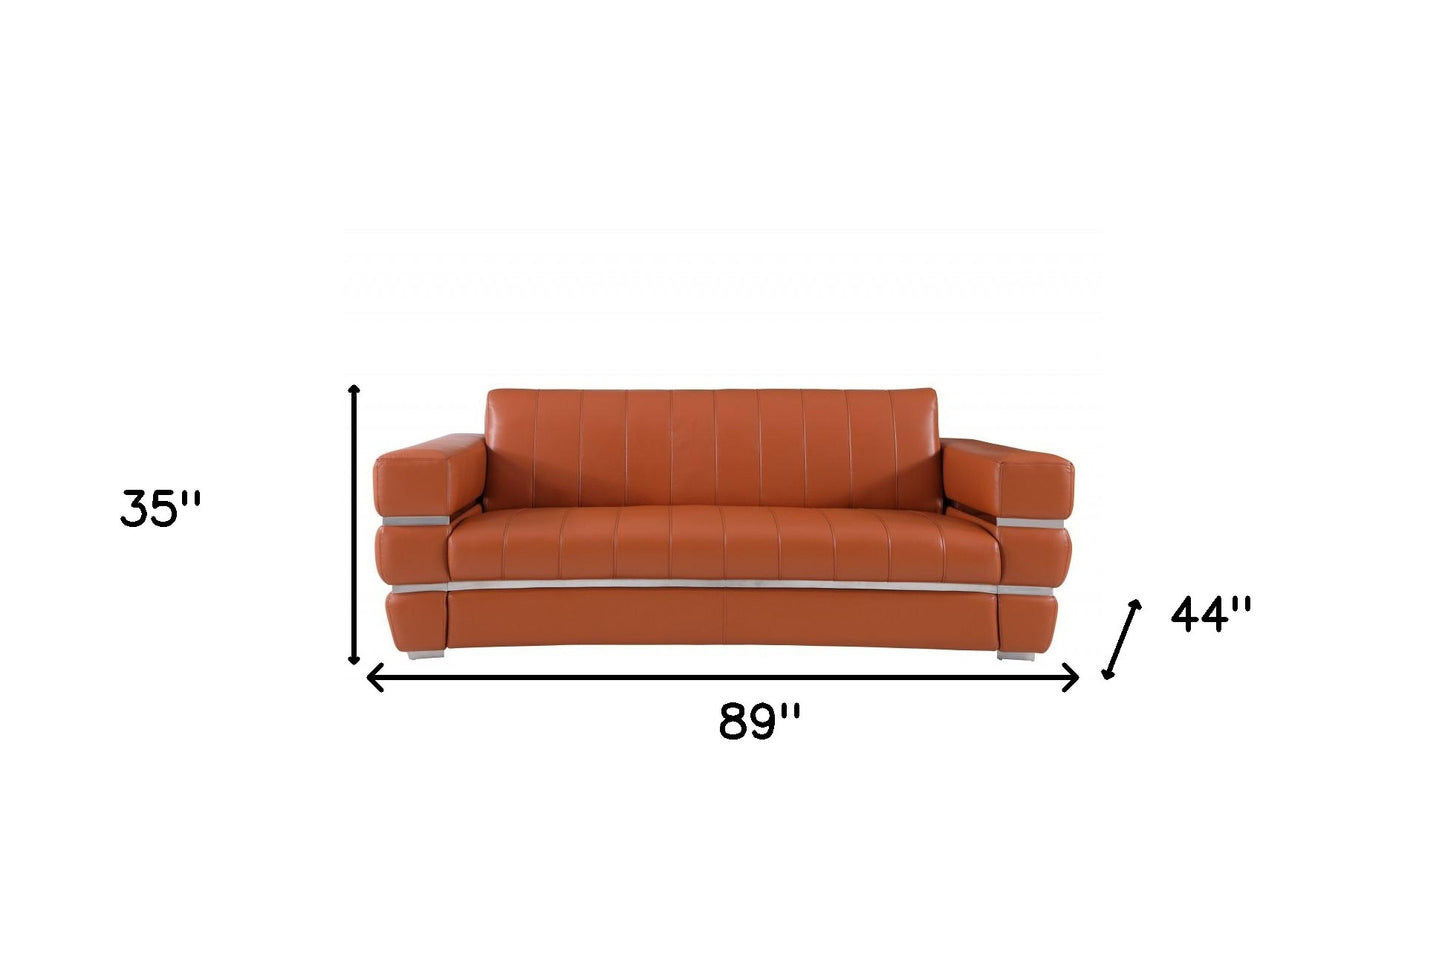 89" Brown Italian Leather Sofa With Silver Legs